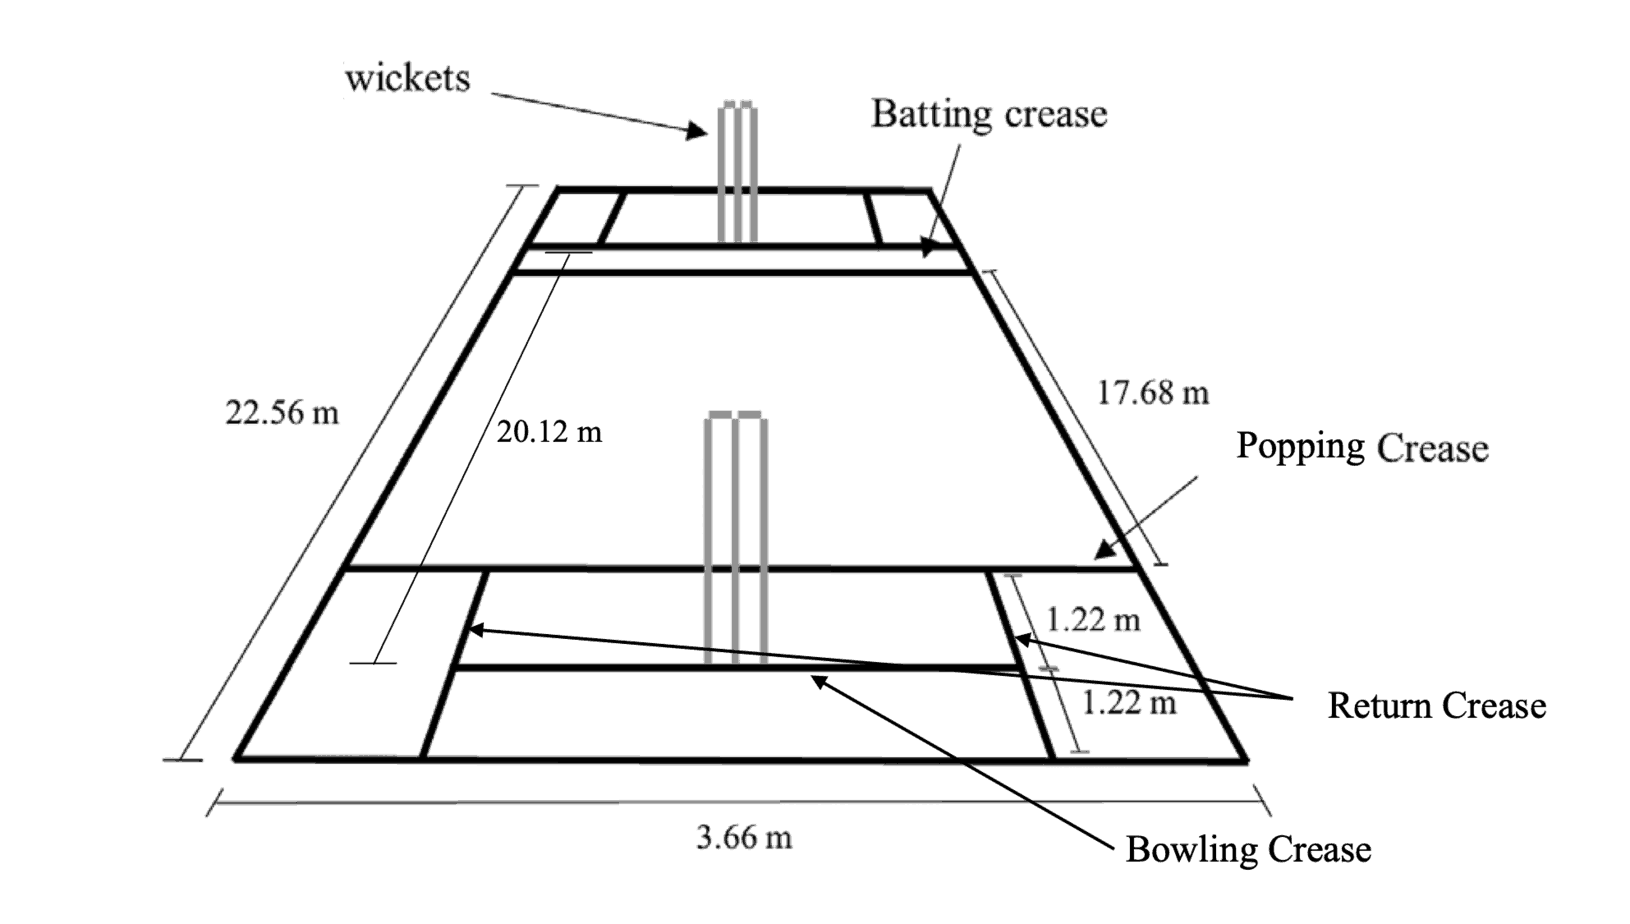 cricket-pitch-length-width-with-dimensions-visual-illustration-cricket-mastery